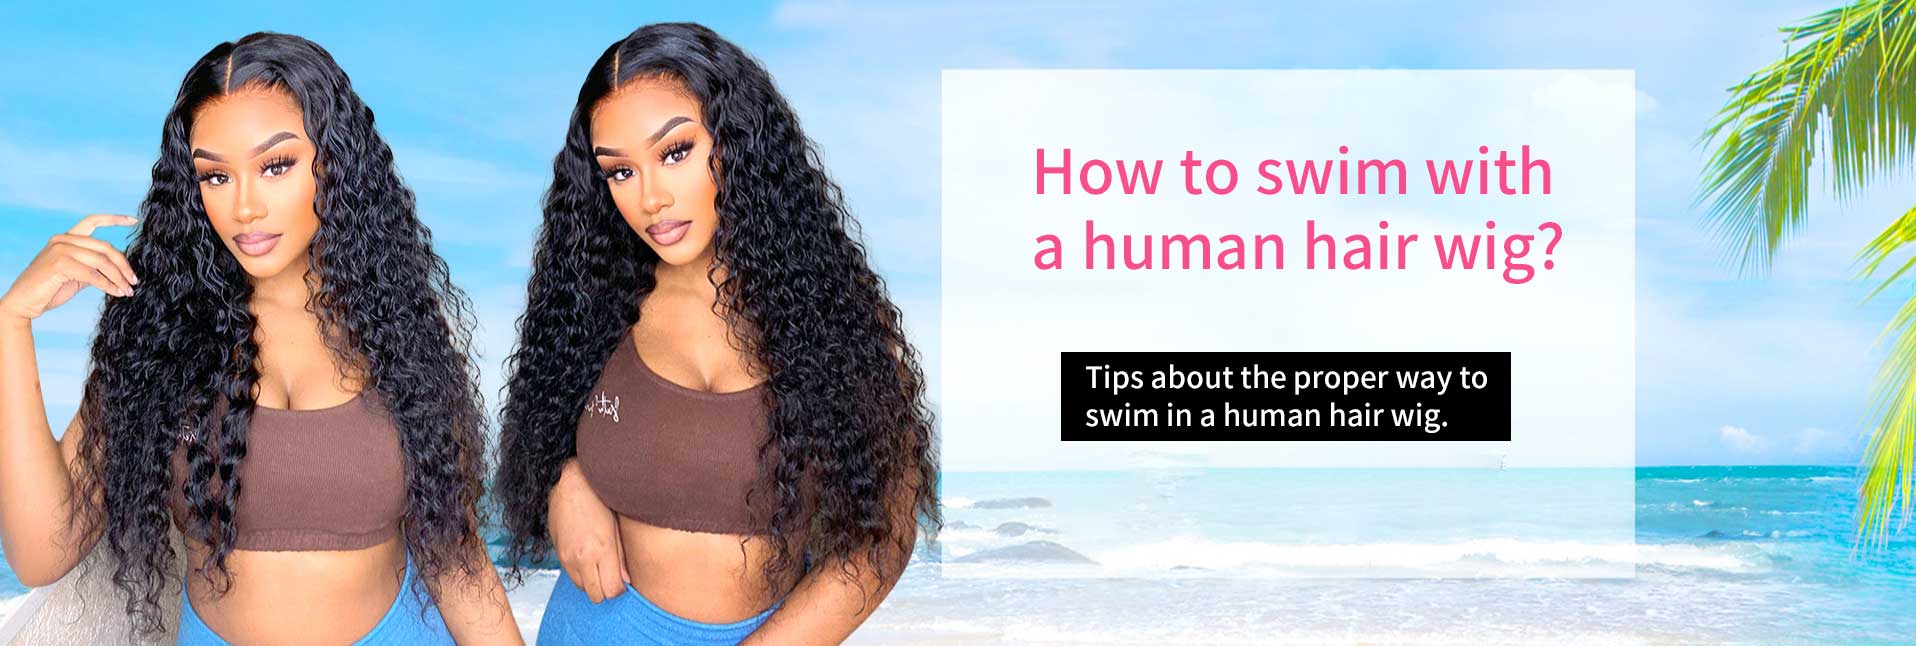 how to swim with a human hair wig on?